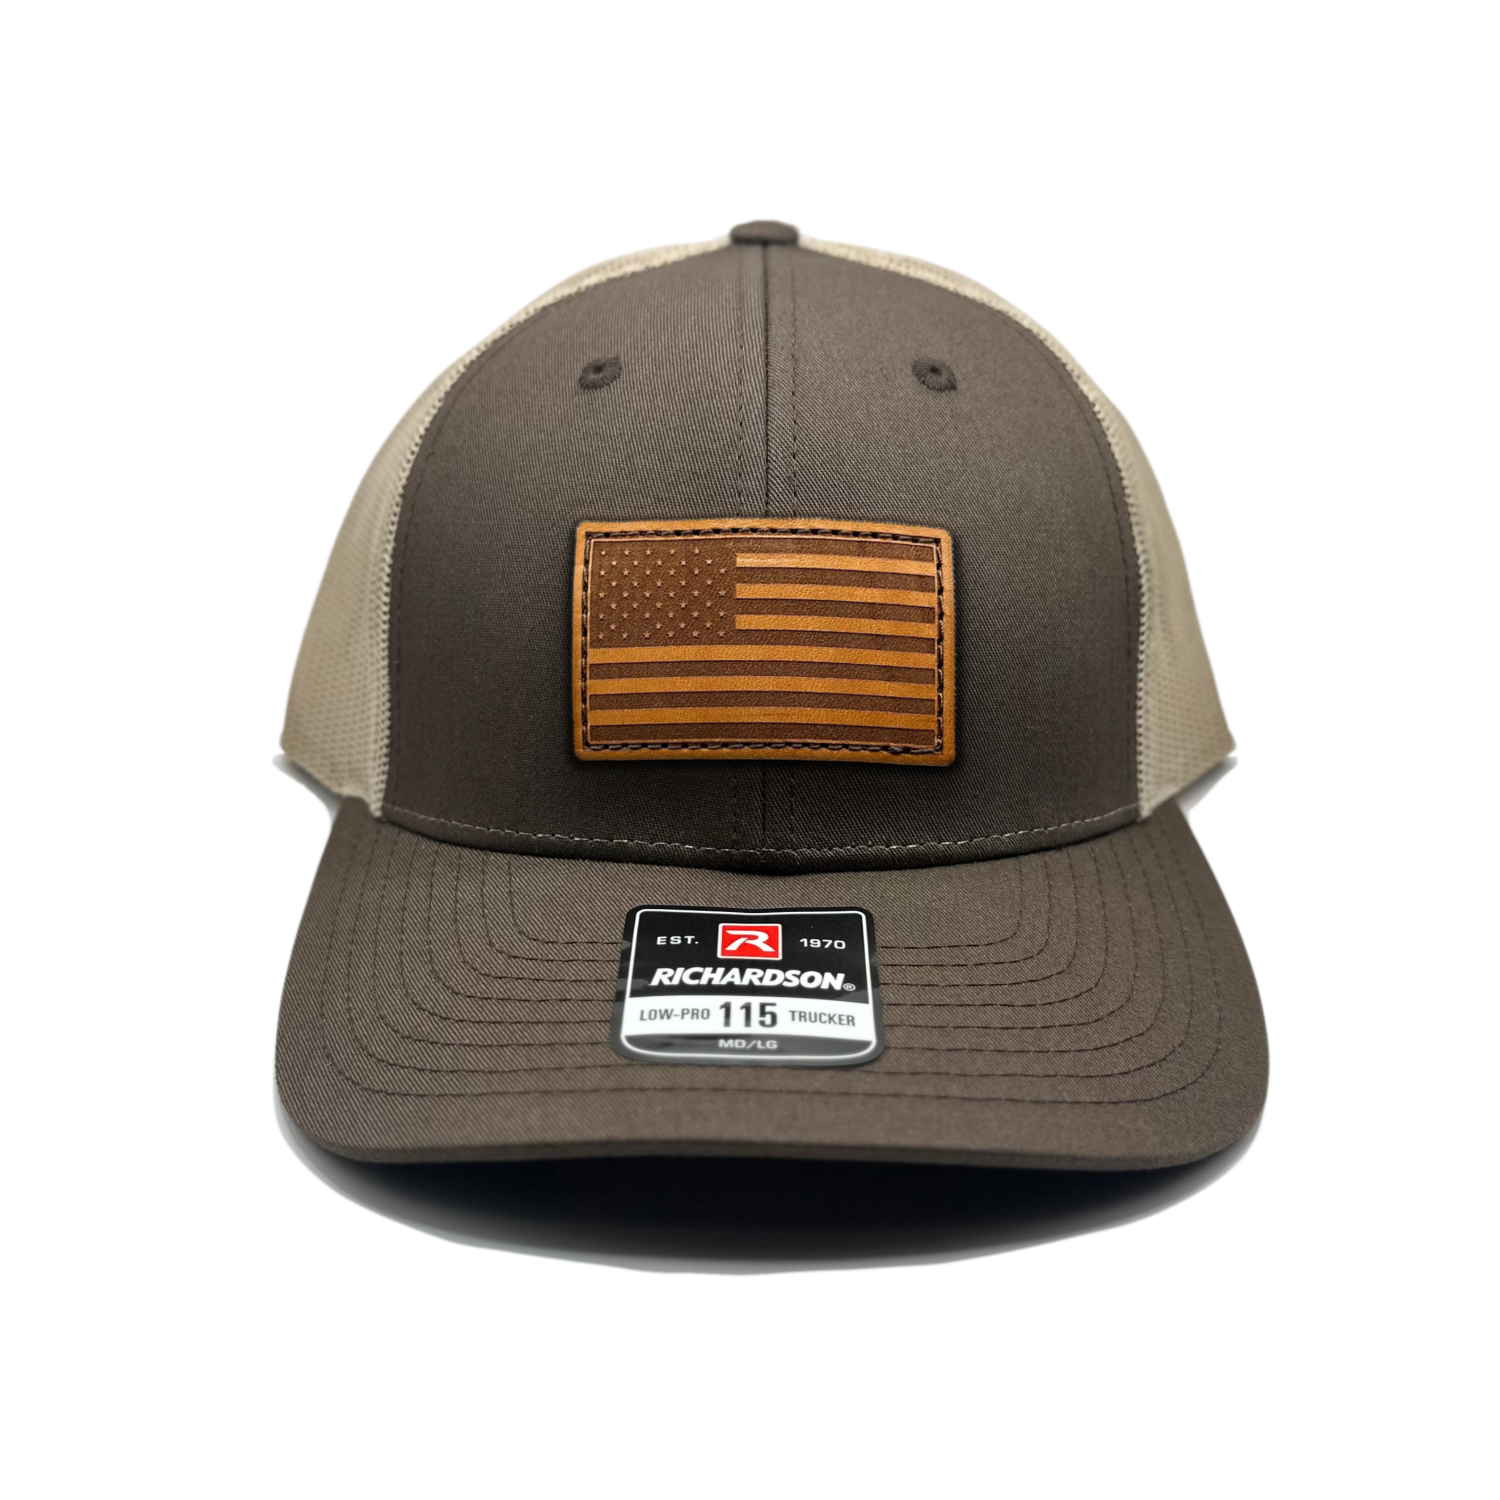 Image of a Brown/Khaki Richardson 115 hat with an American flag patch made of genuine leather, laser engraved and securely sewn onto the hat. The low profile trucker style hat is adjustable to fit small or M/L sizes, offering a versatile and fashionable accessory for any occasion.